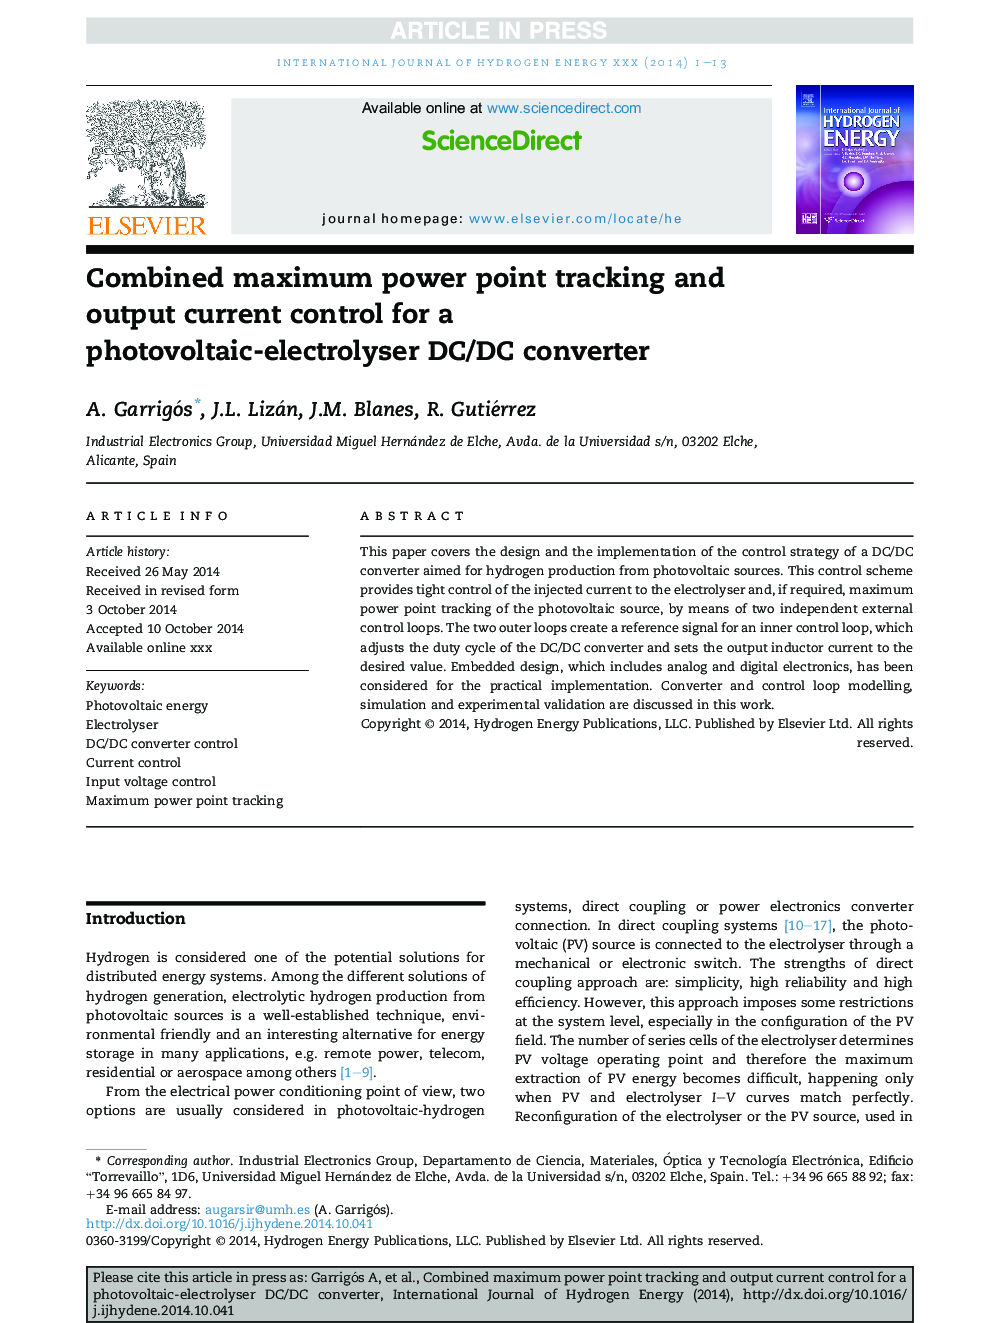 Combined maximum power point tracking and output current control for a photovoltaic-electrolyser DC/DC converter